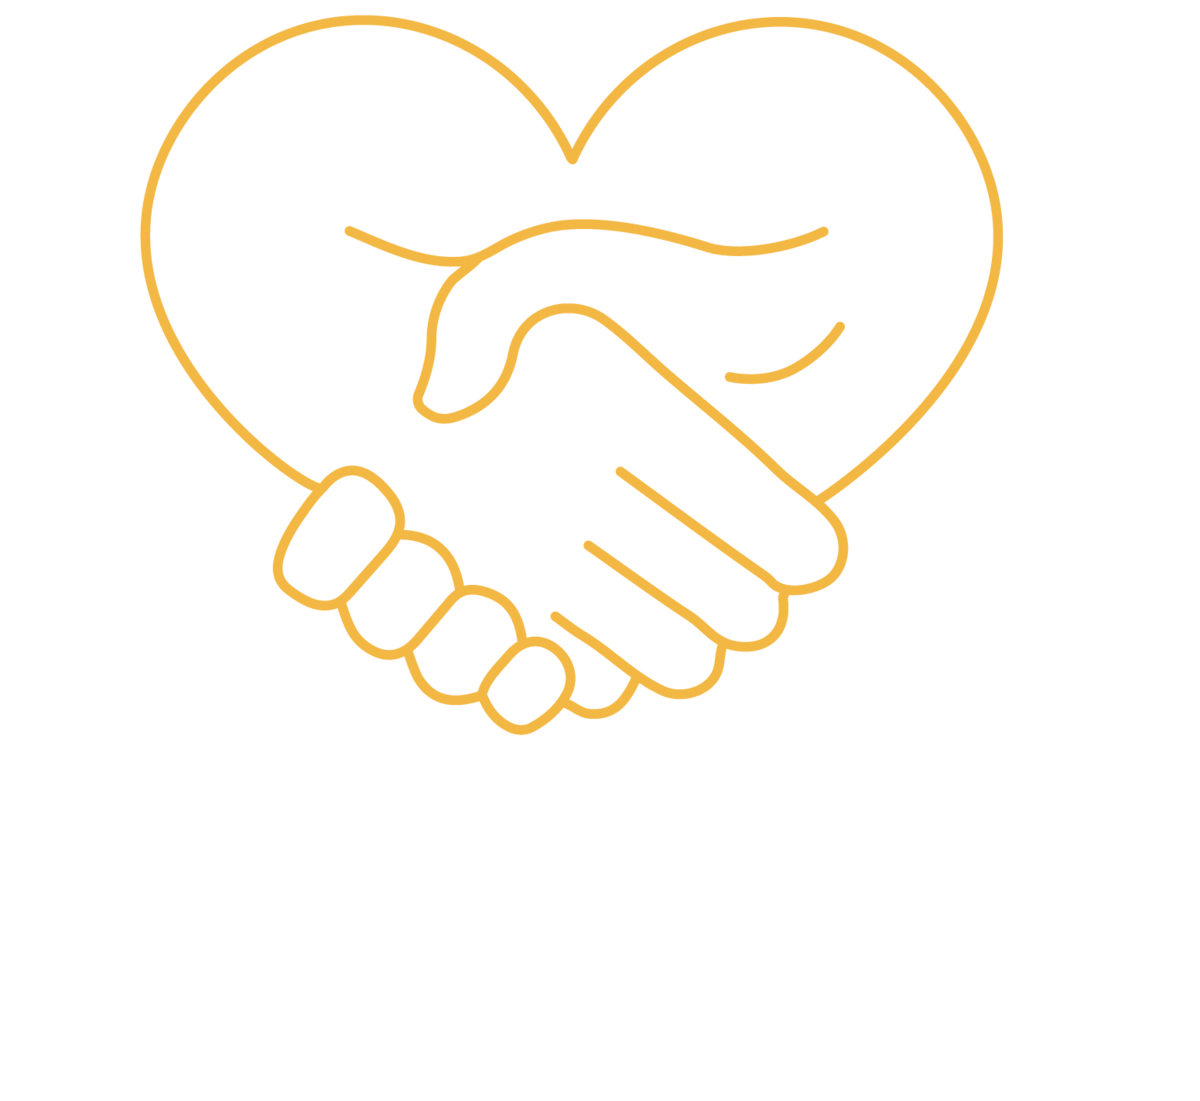 Icon of two hands clasped in handshake, the top of the hand and wrist forms the shape of a heart